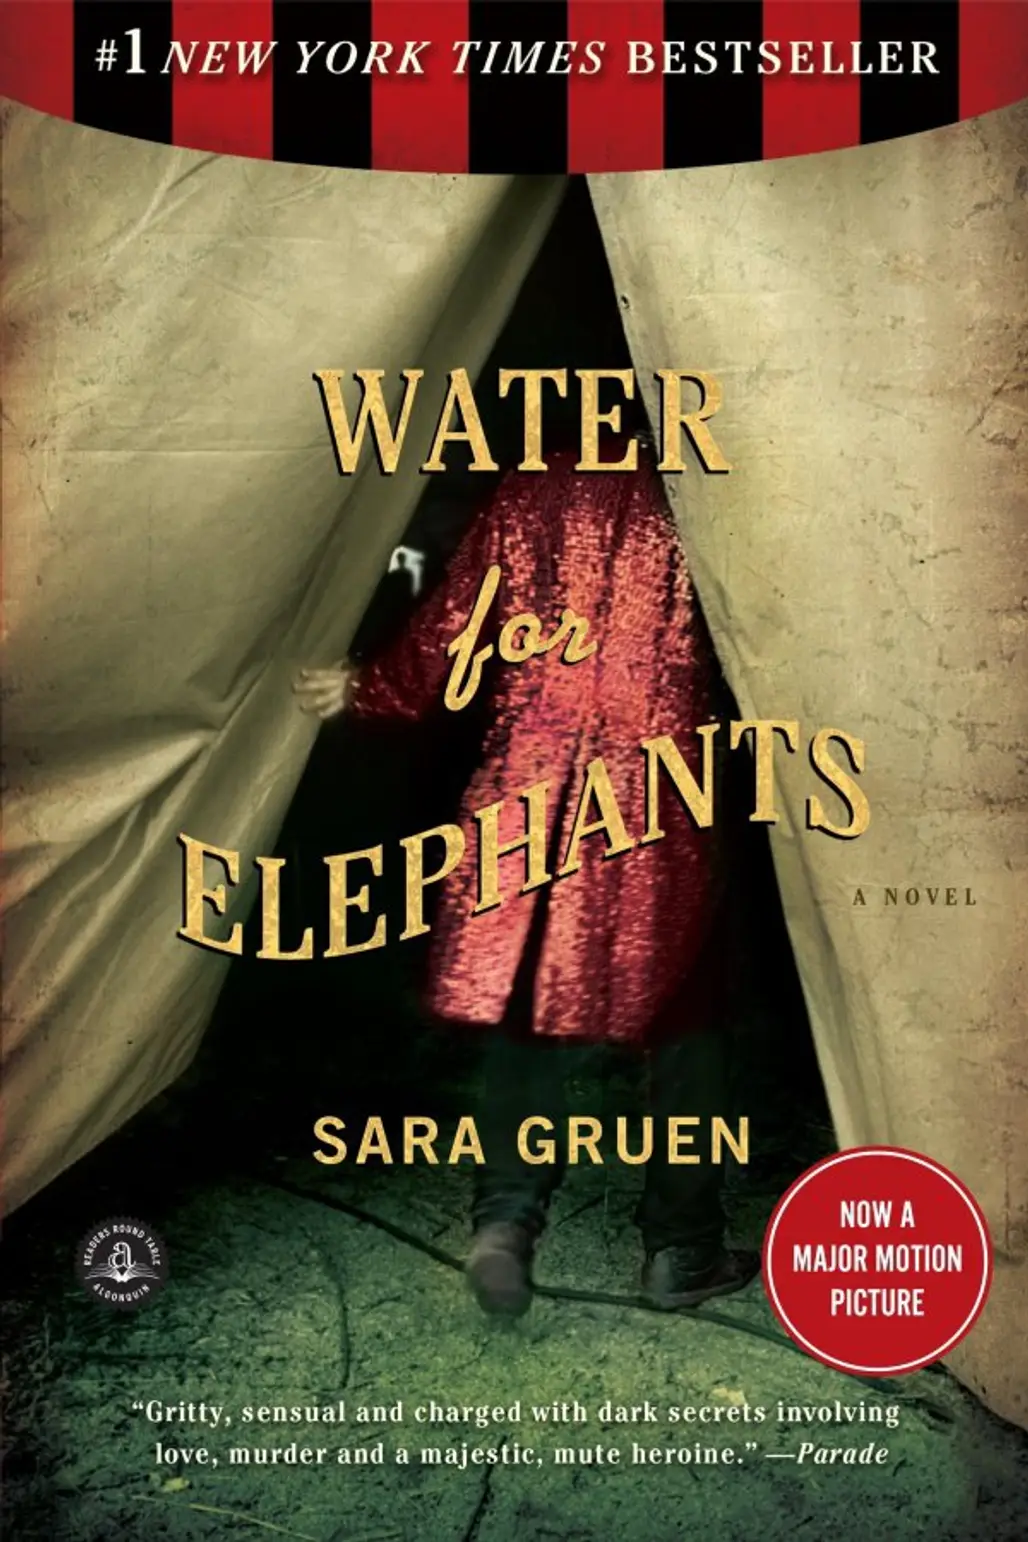 Water for Elephants by Sara Green